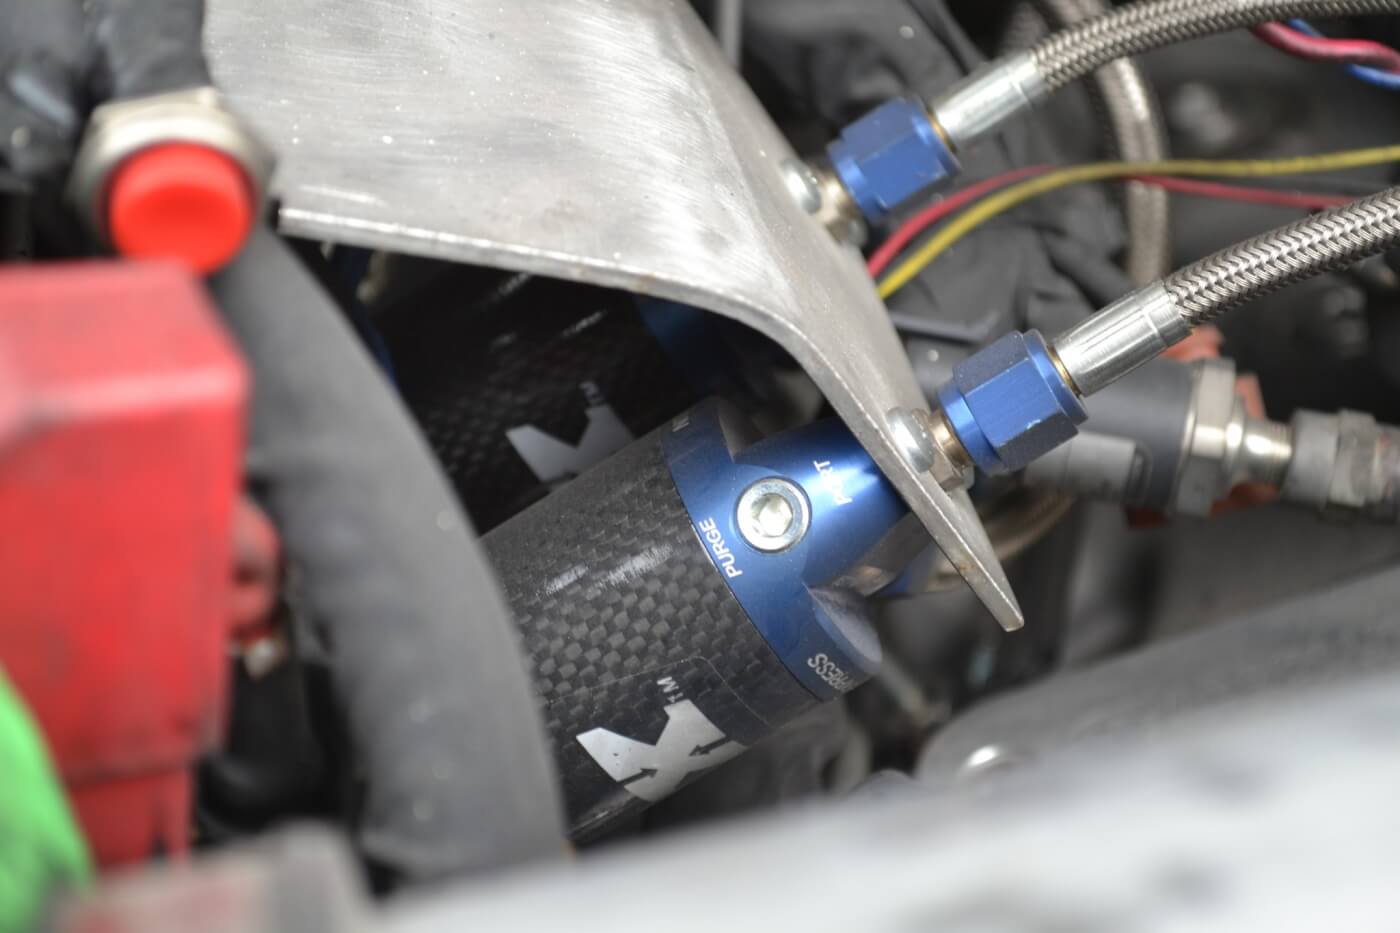 Morgan wanted to push the 6.7L platform as far as he could while retaining a stock-style turbo, which meant a lot of nitrous. Two big 0.125-inch solenoids are used for dyno runs, as well as dragstrip passes.